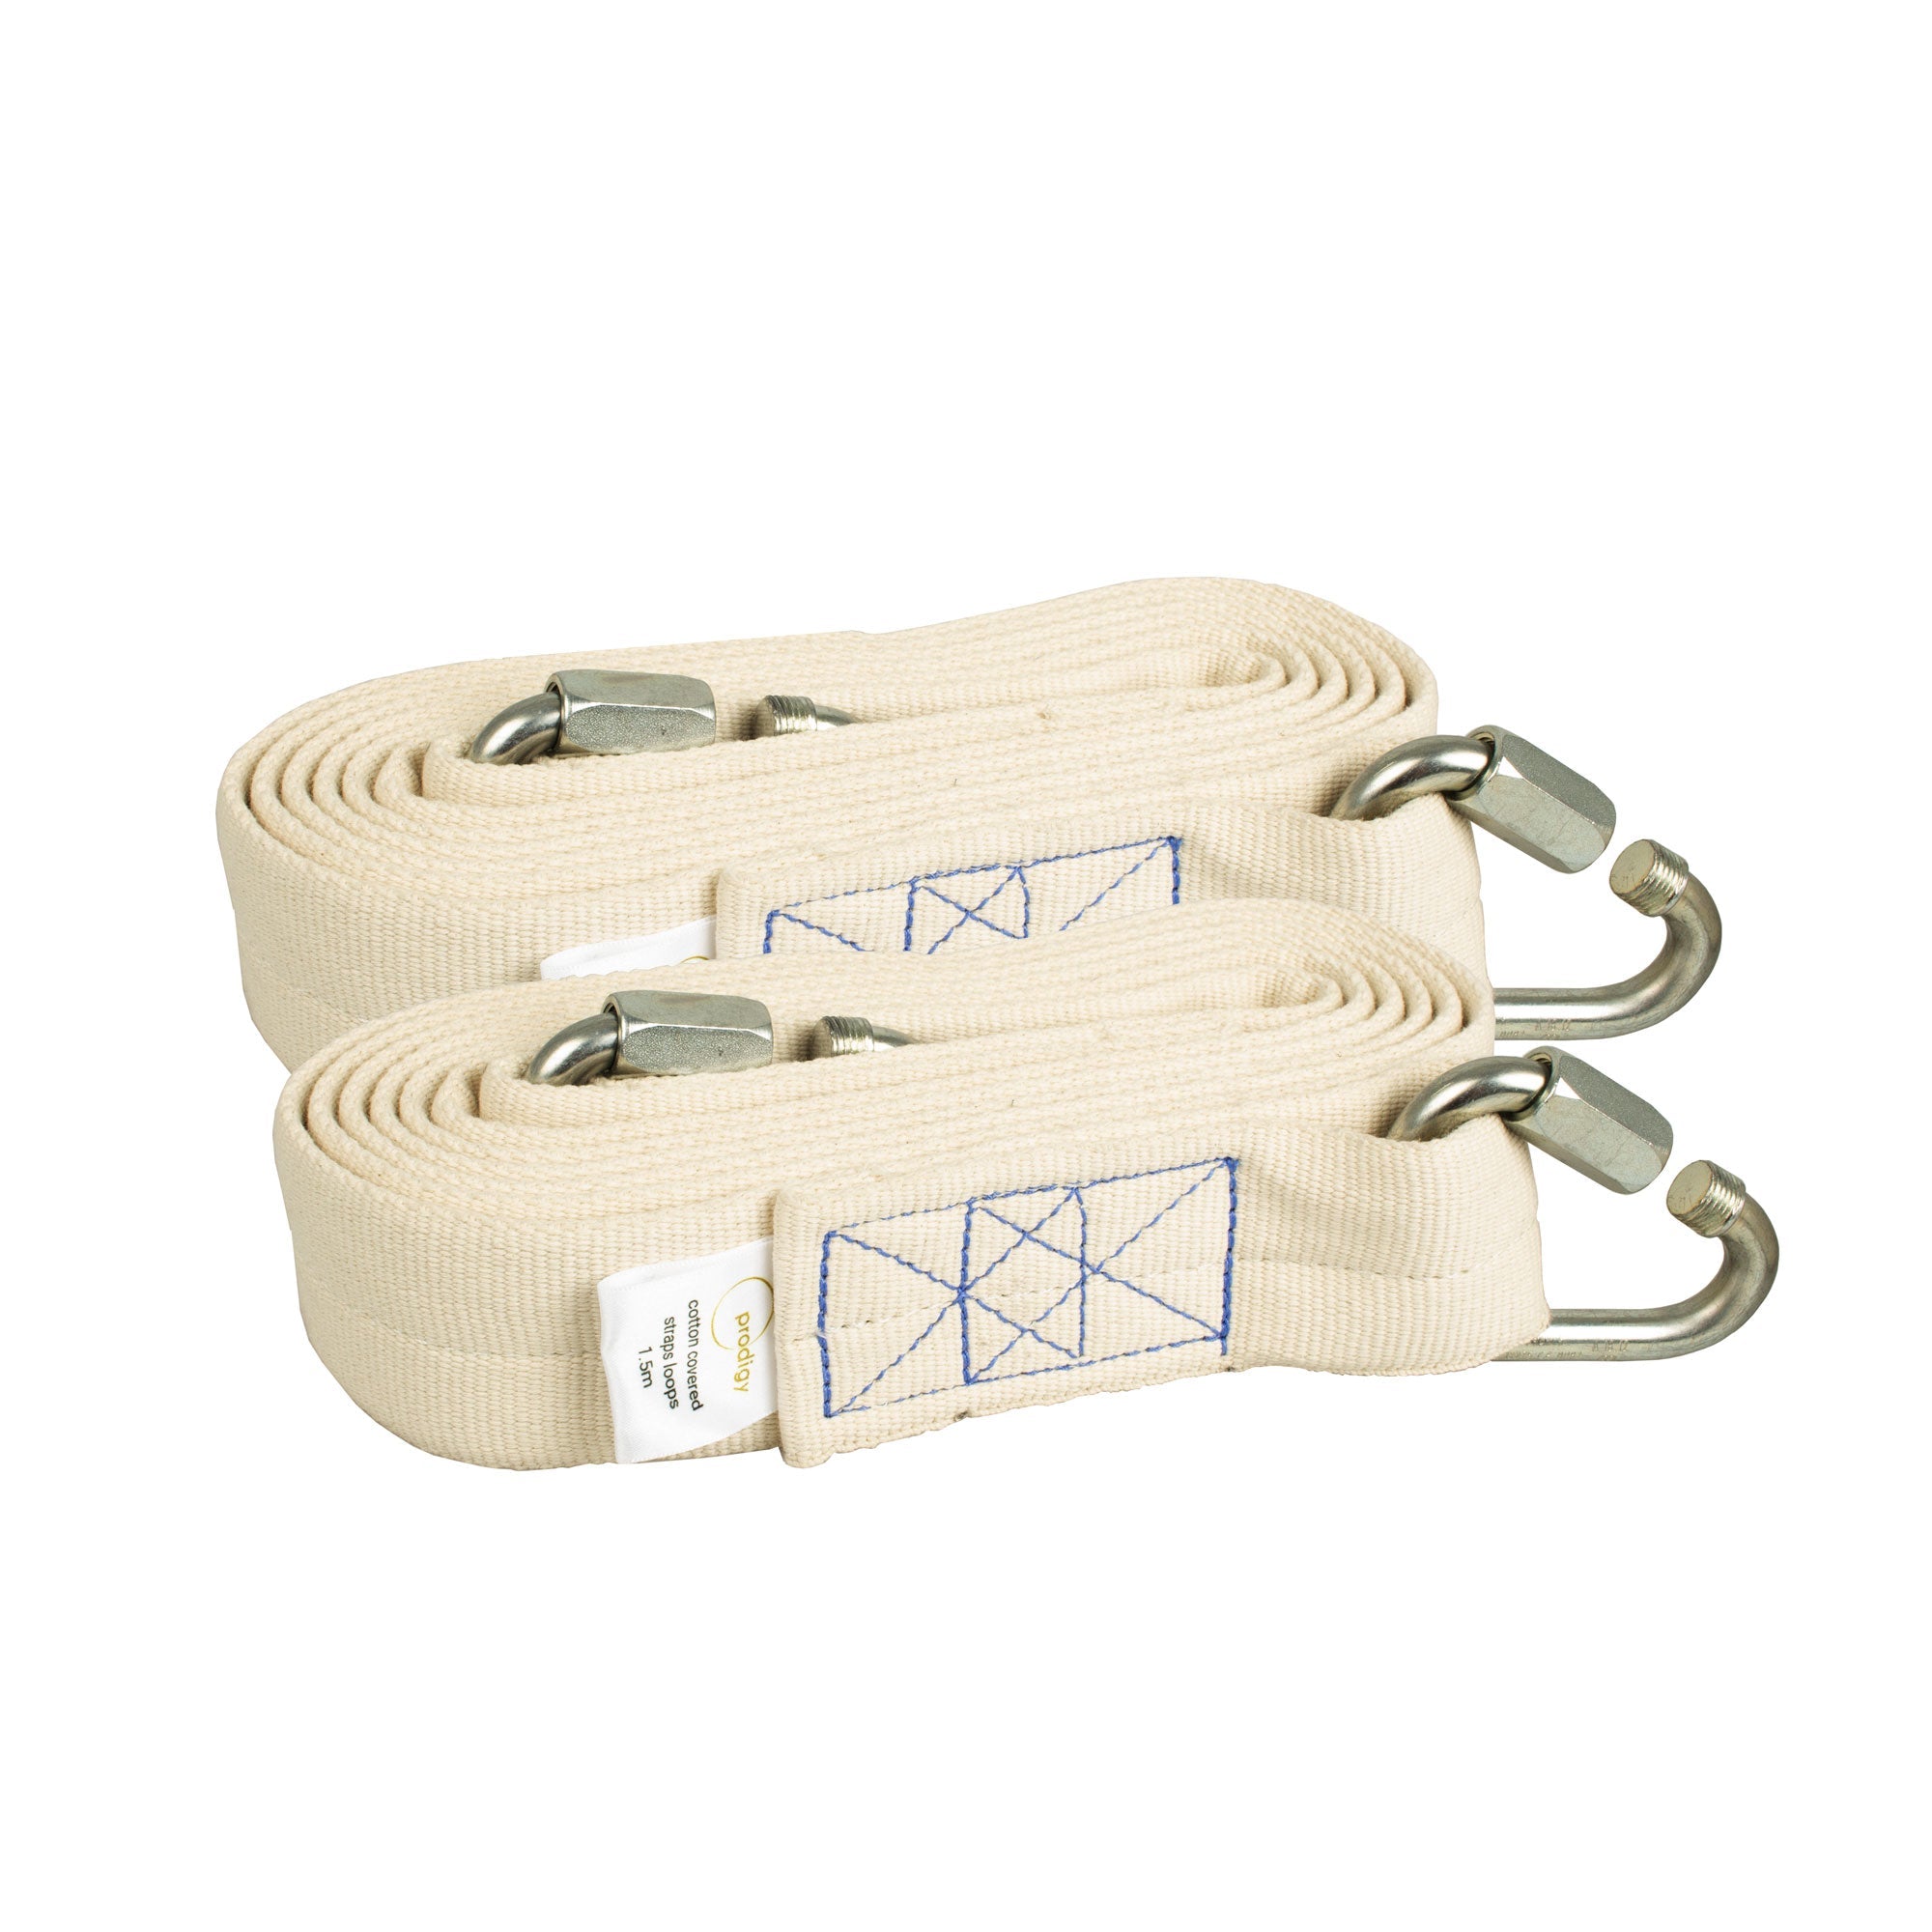 Prodigy cotton covered aerial loops - 150cm coiled up